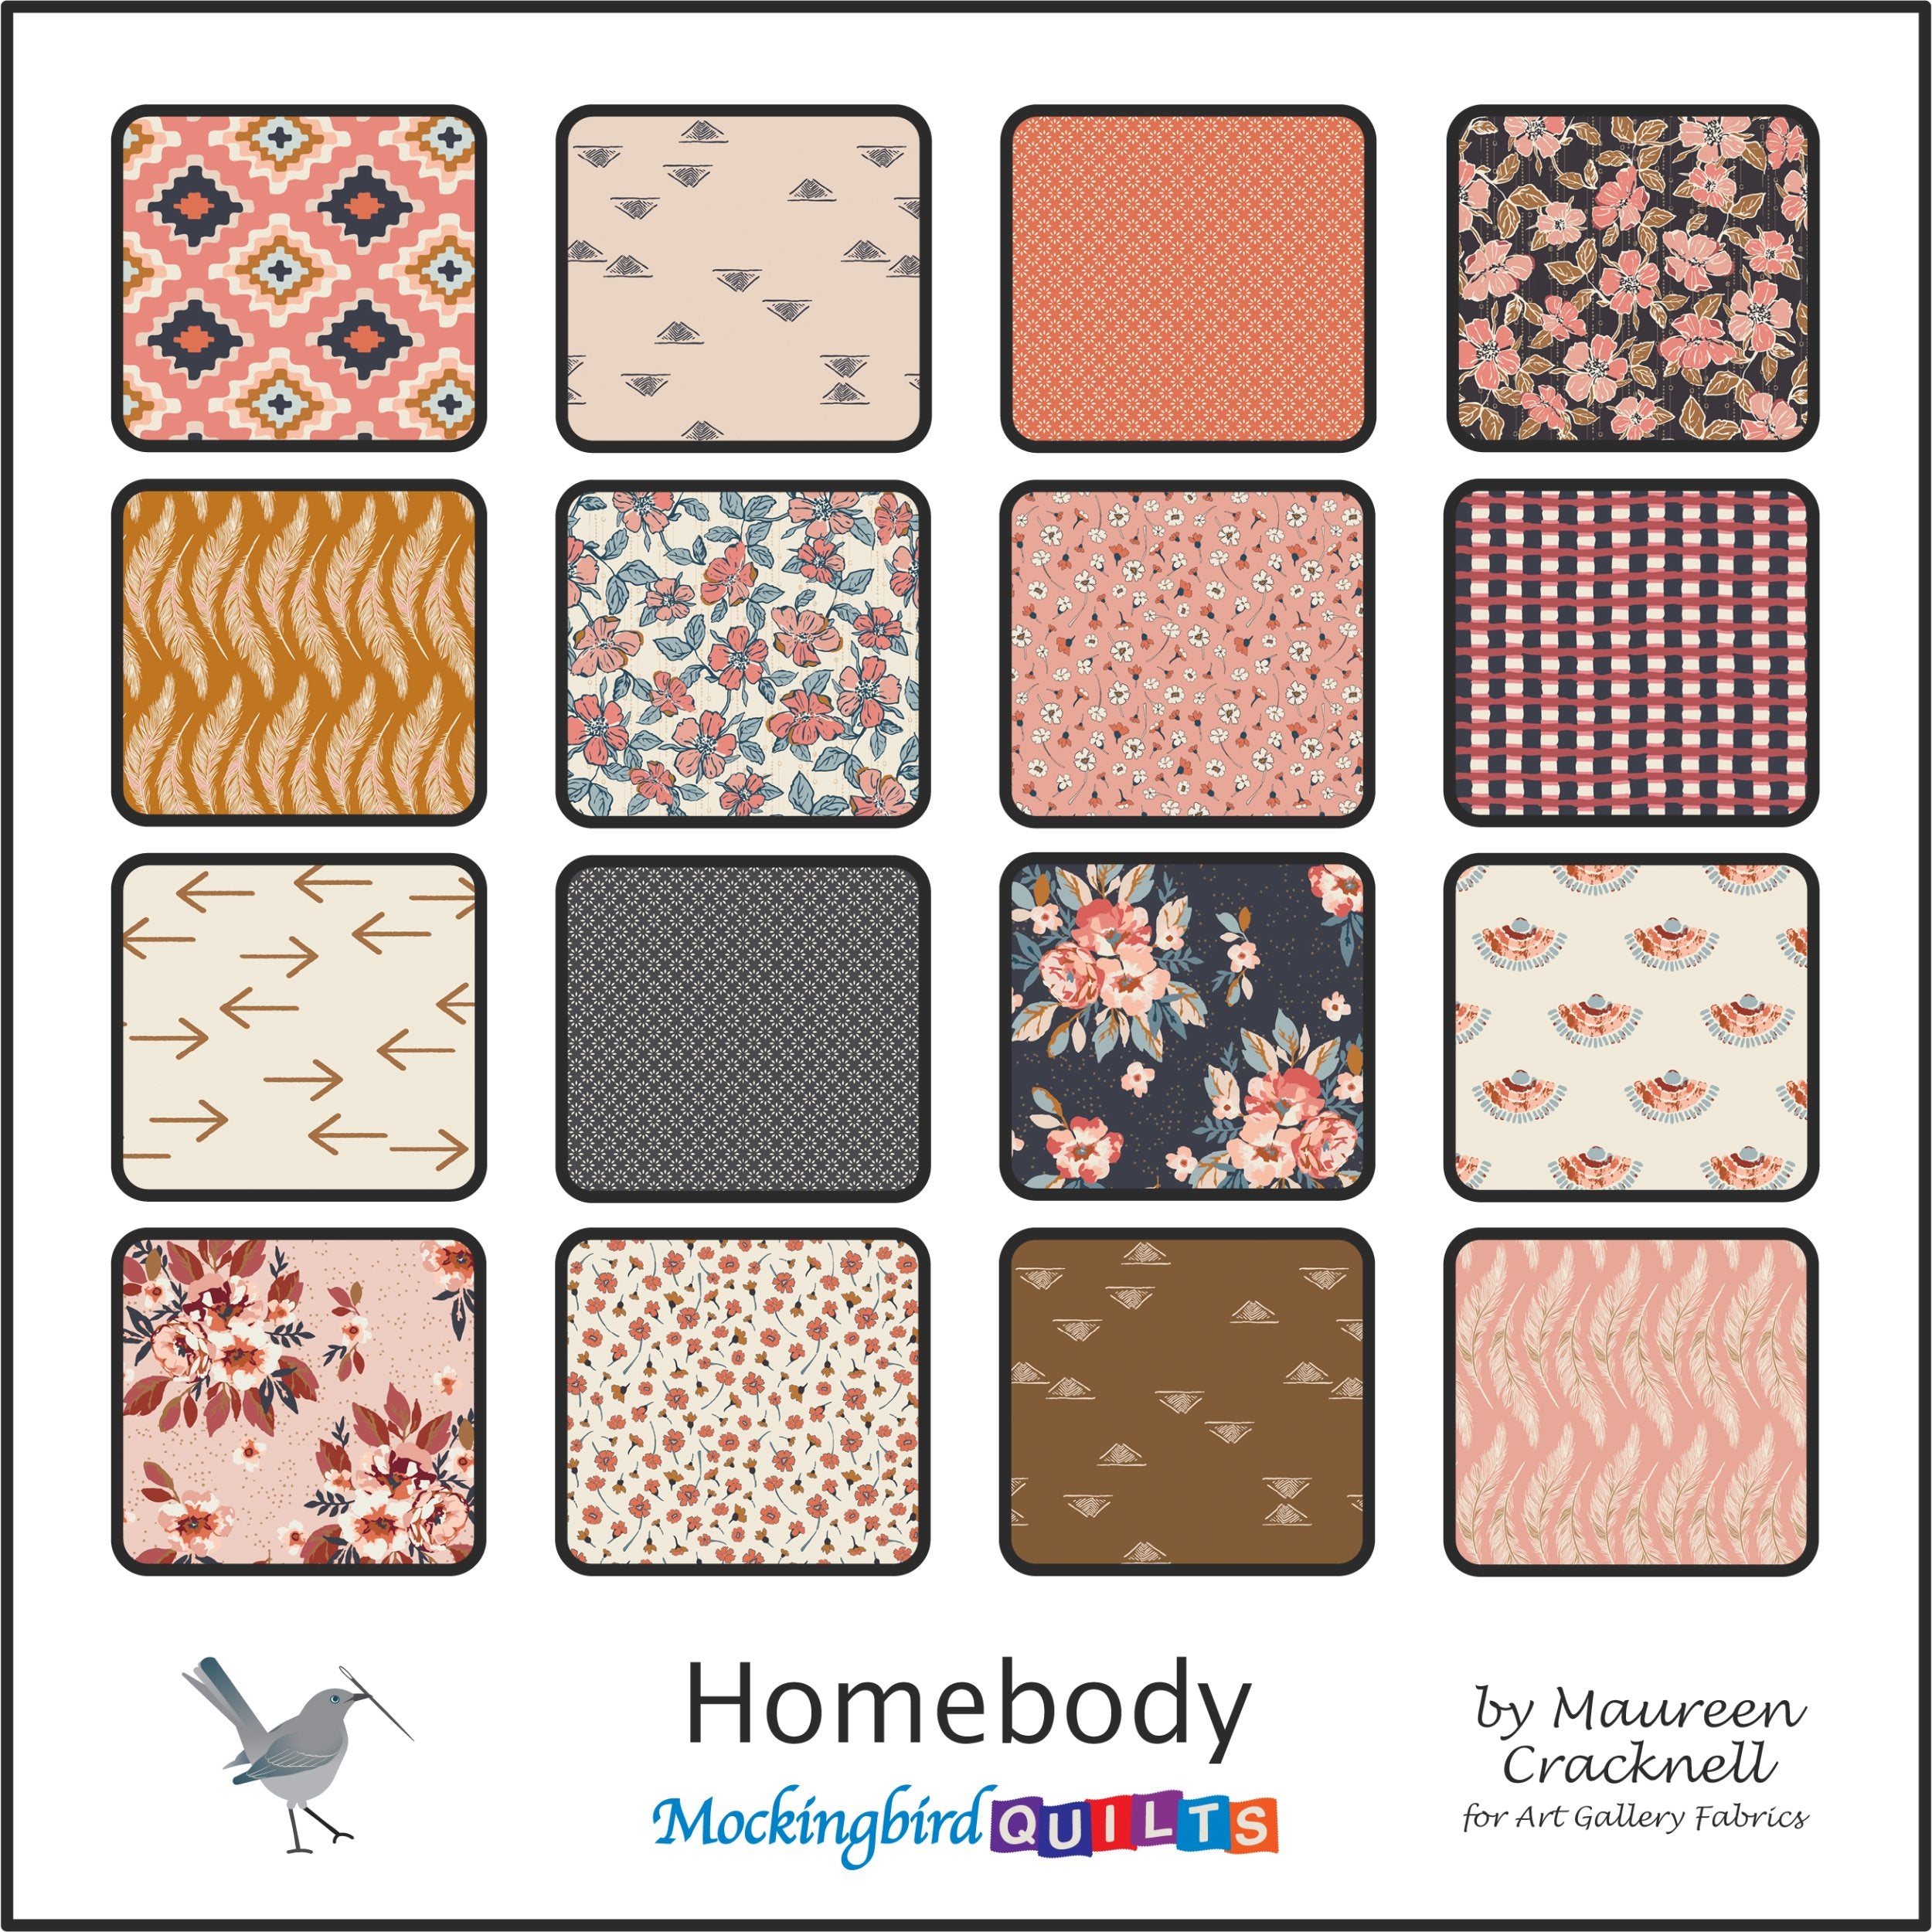 This image shows sixteen fabric swatches in the collection “Homebody” by Maureen Cracknell. This fabric line was inspired by that fuzzy, warm feeling you only get from being in your own home.